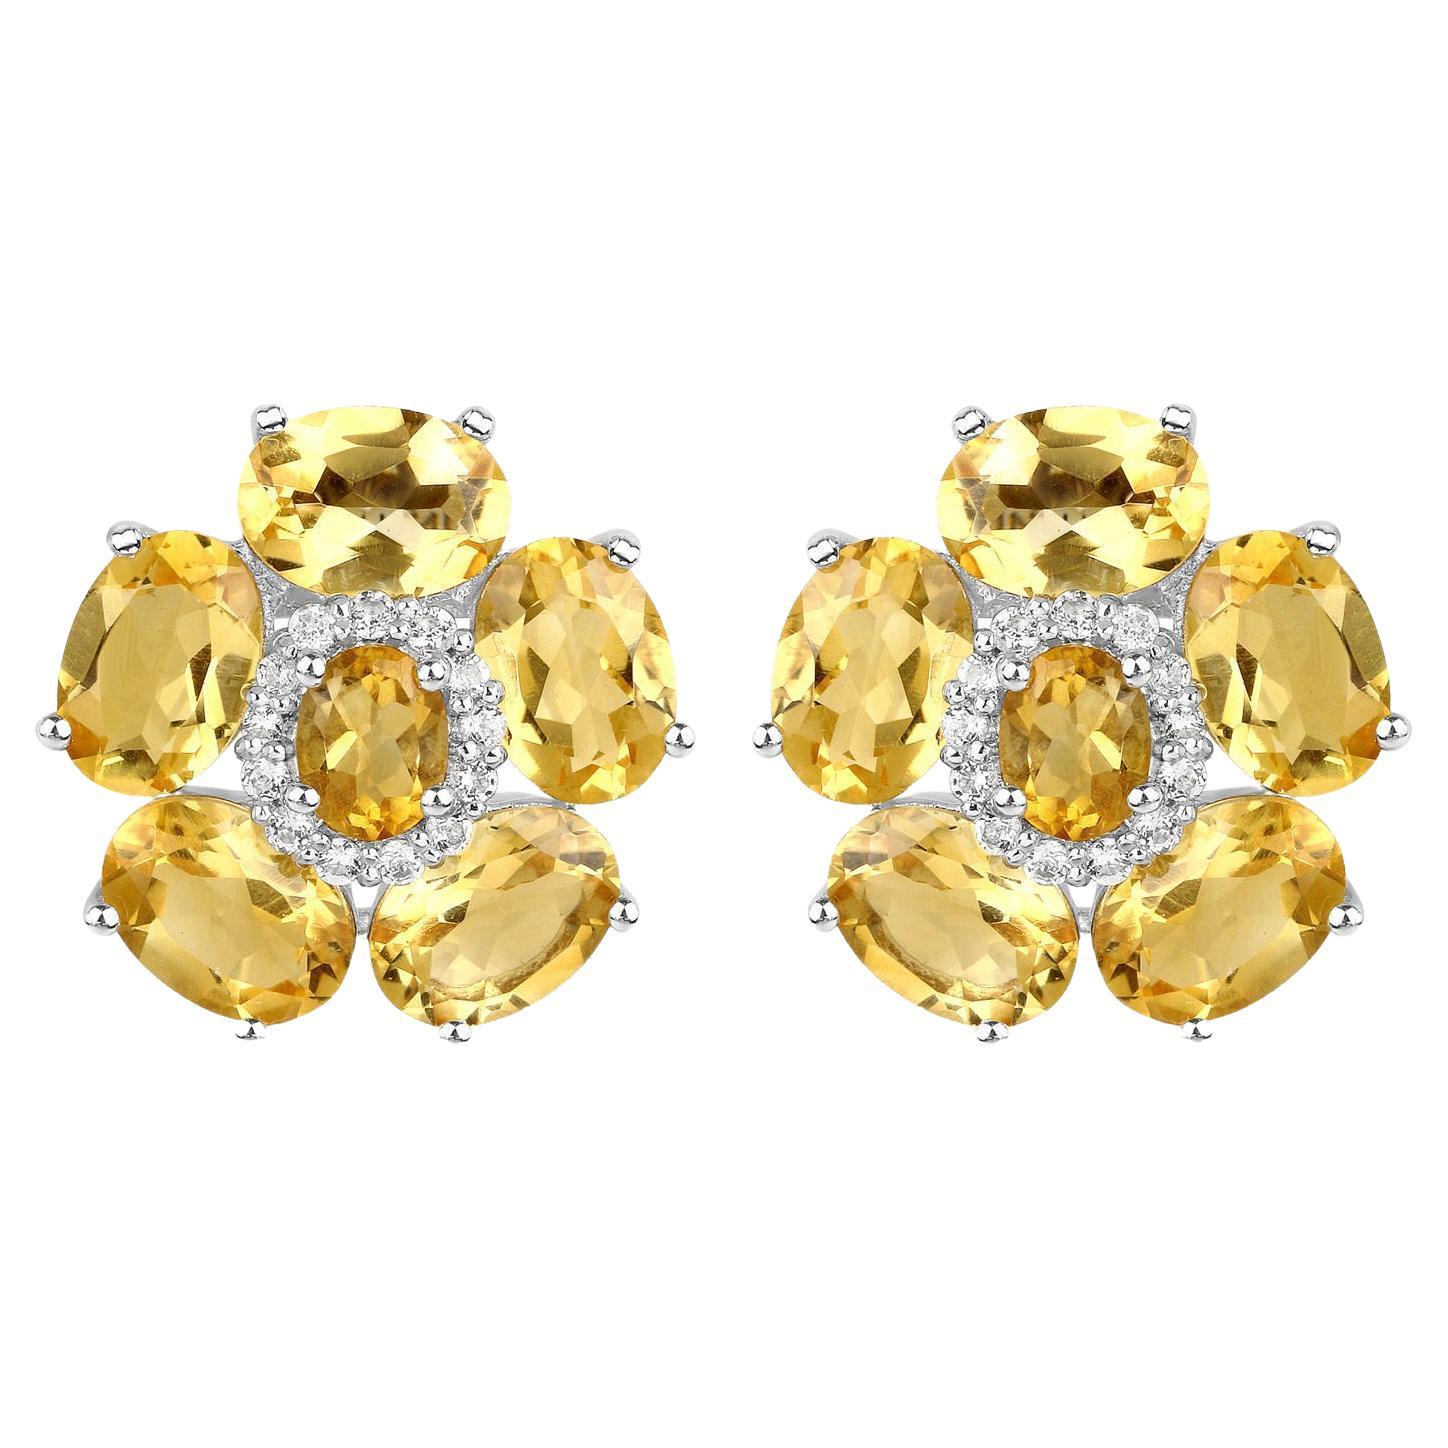 Natural Citrine and White Topaz Floral Earrings 8.9 Carats Total For Sale